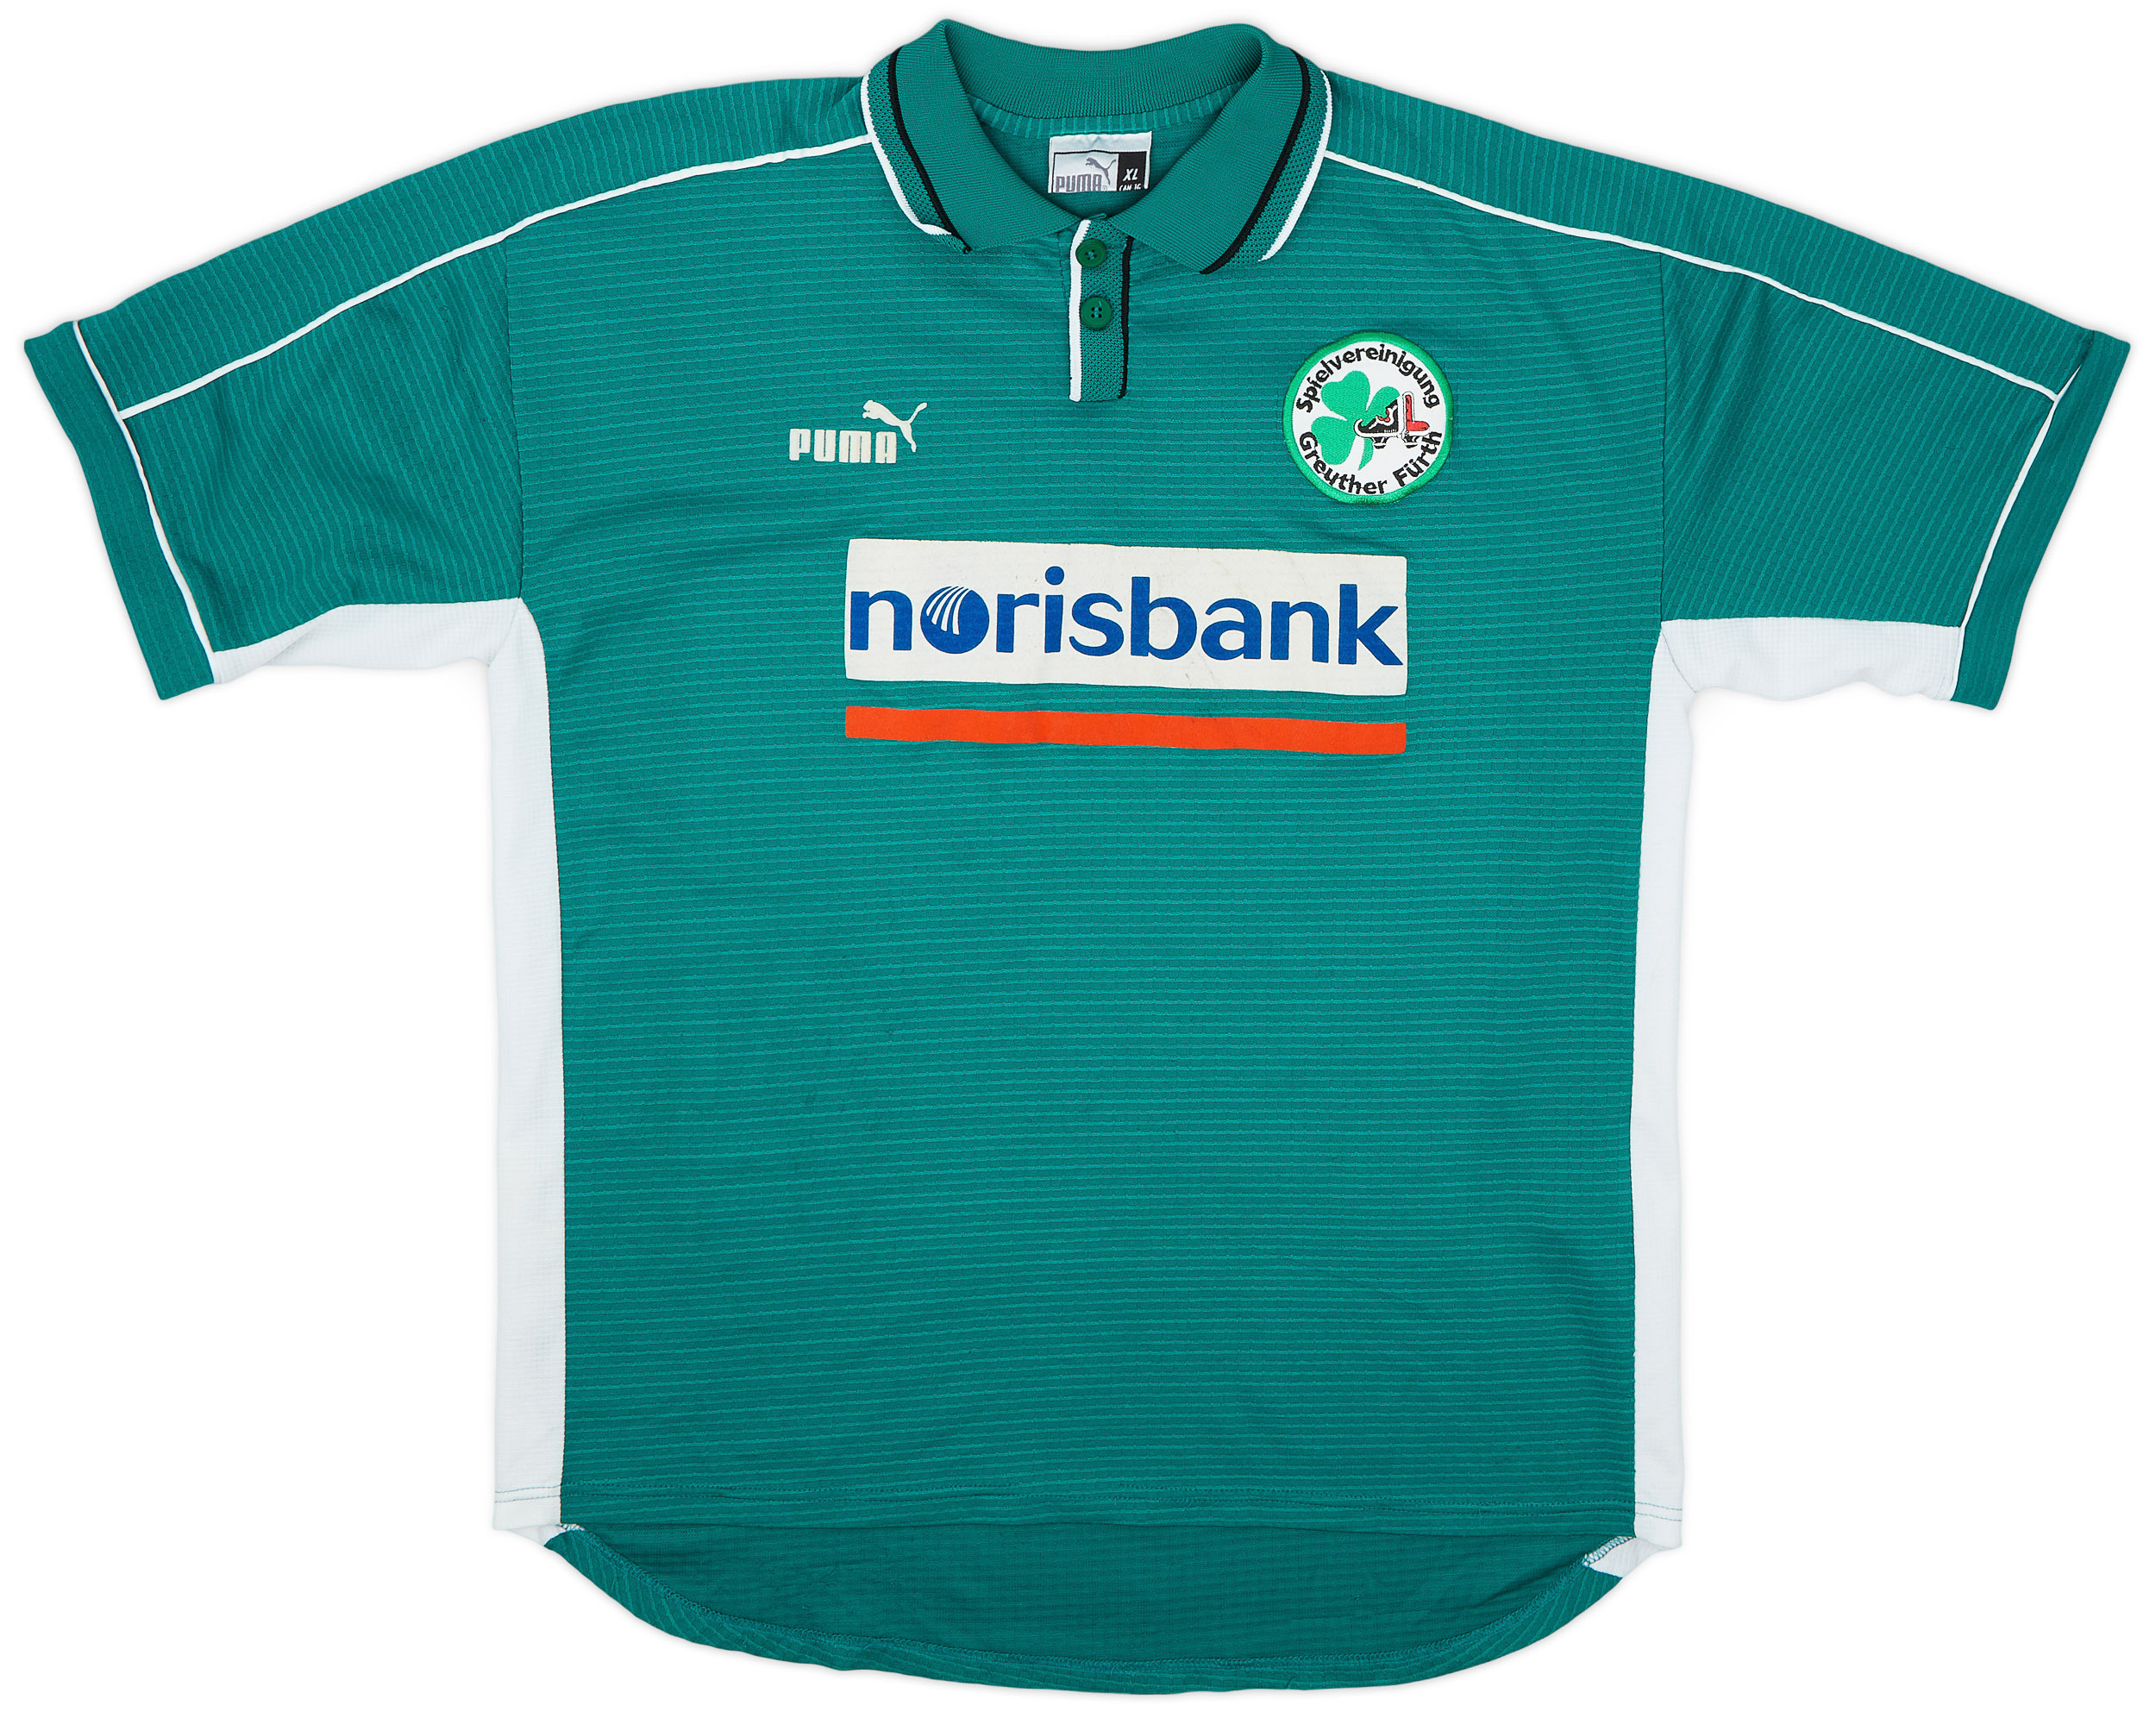 1999-00 Greuther Furth Home Shirt - 6/10 - ()